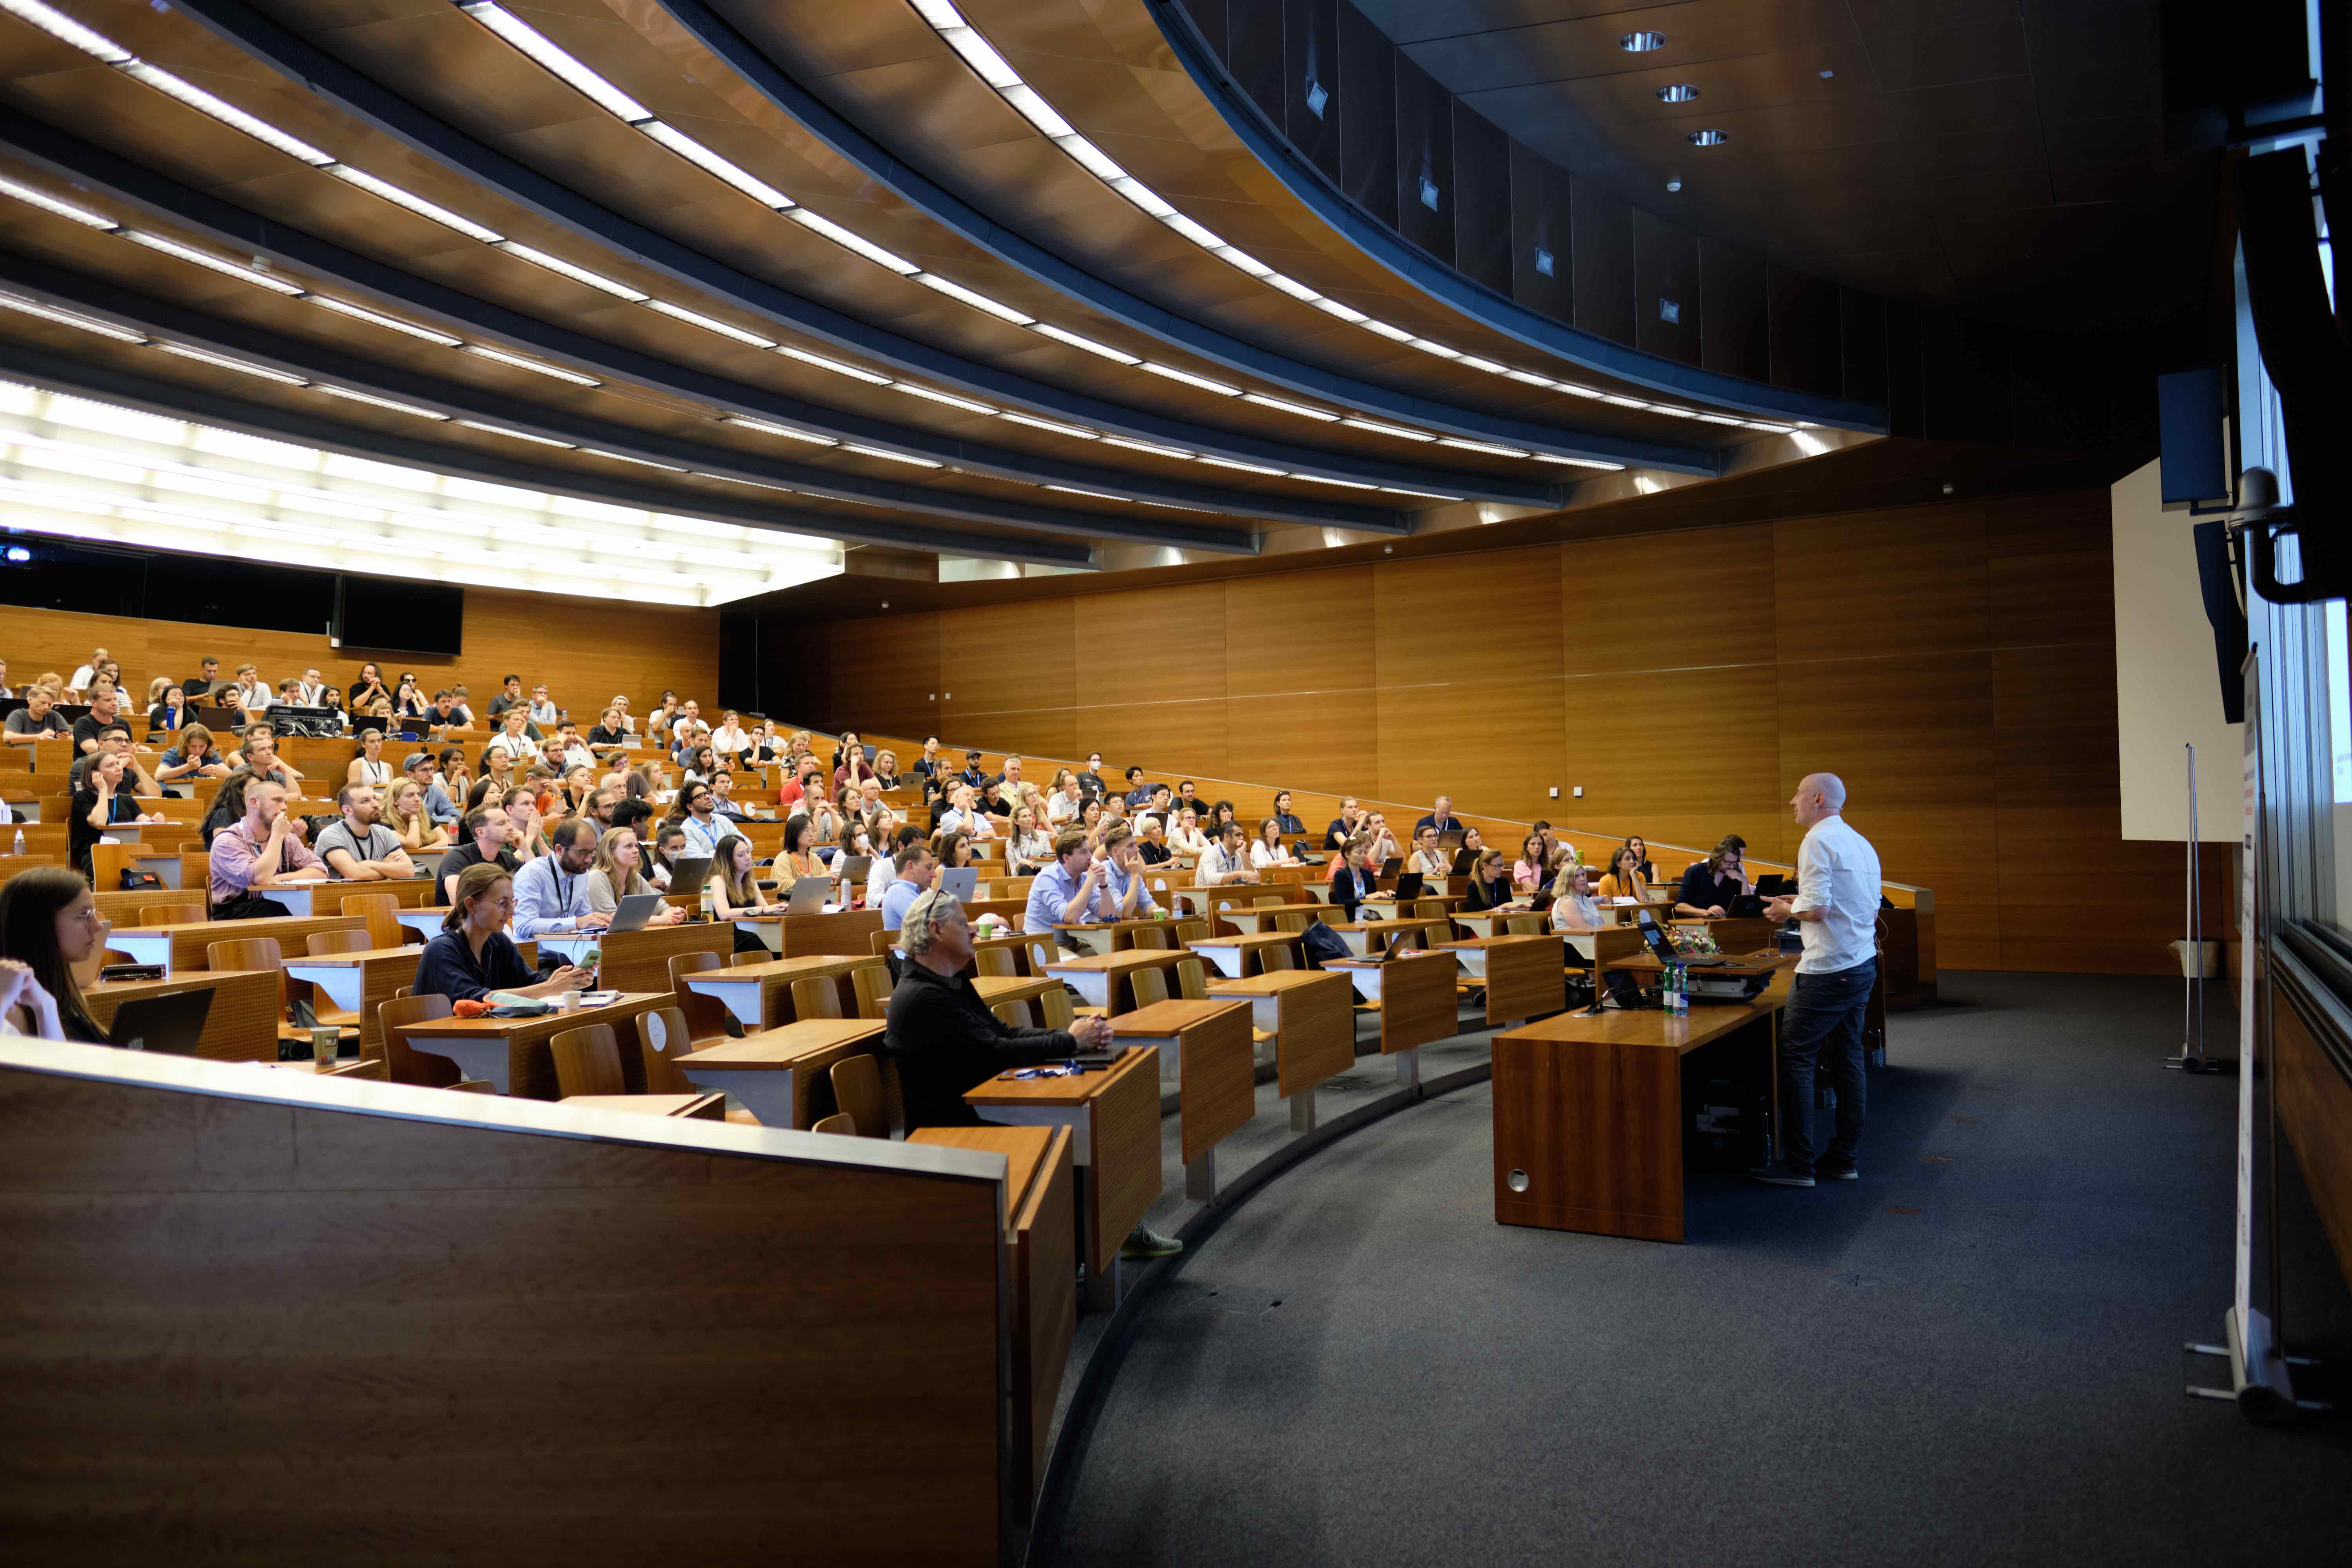 A speaker giving a talk in a lecture Hall.